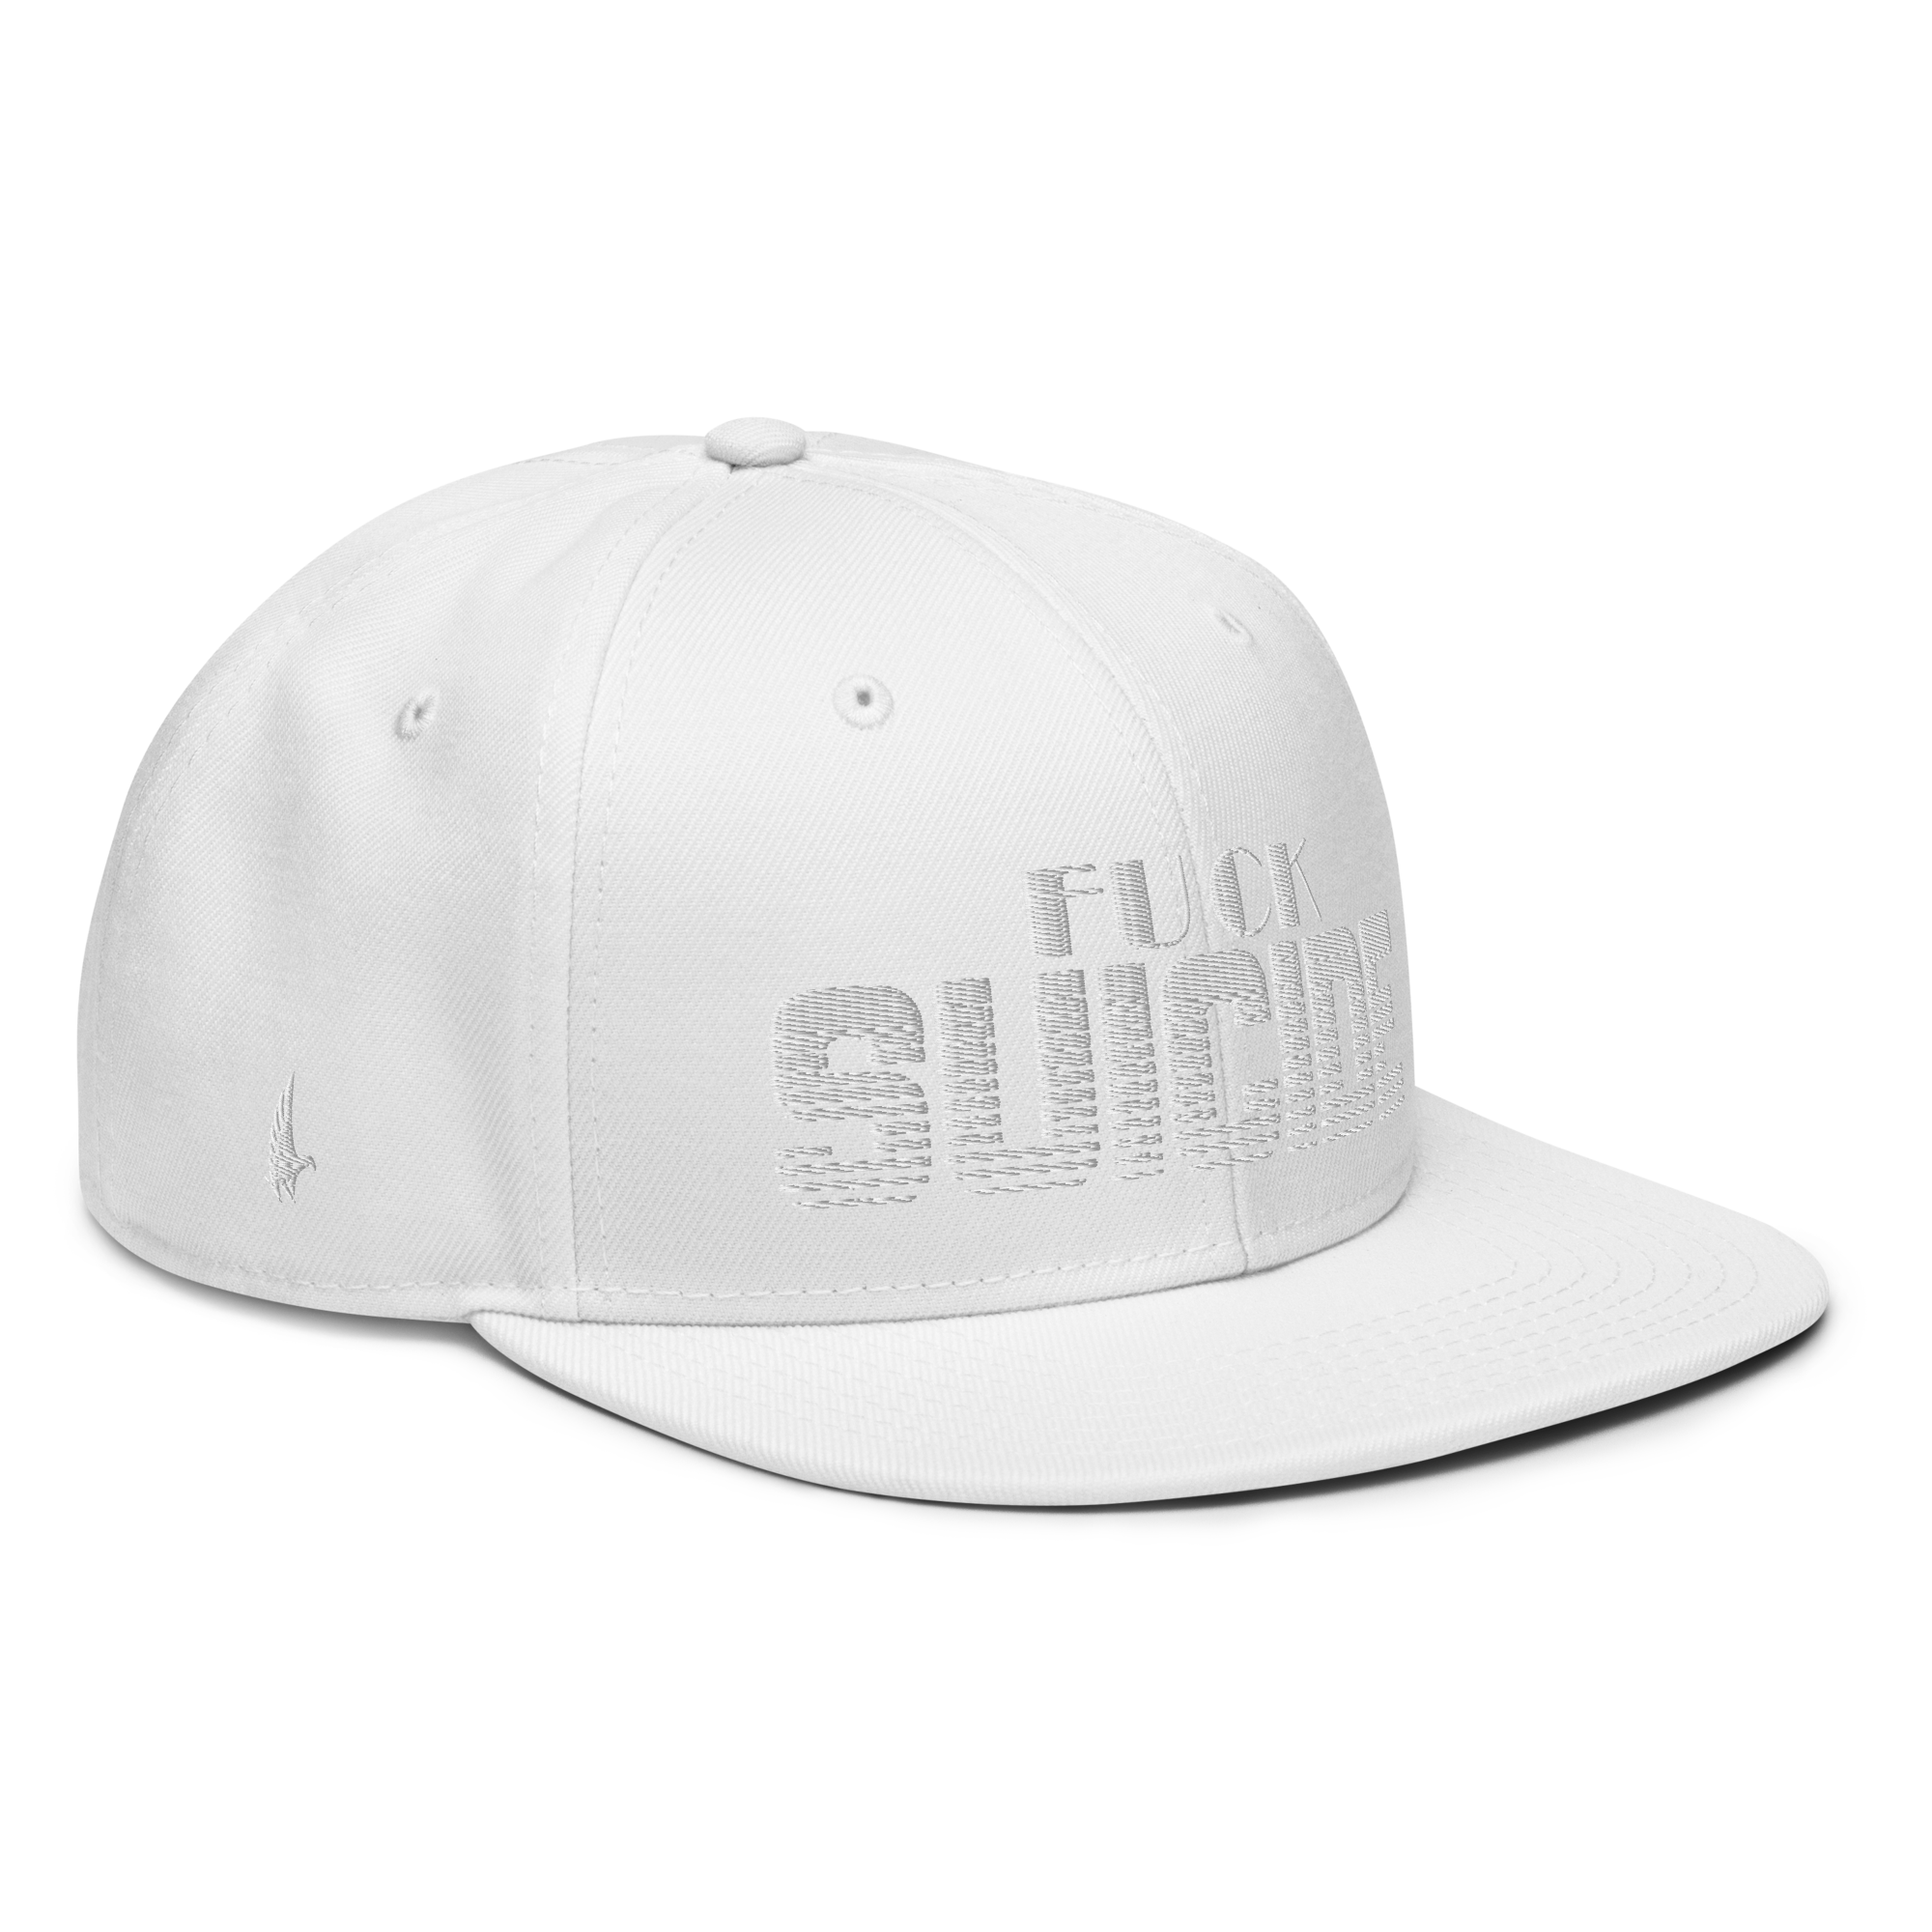 Fk Suicide Snapback Hat - White / White OS - Loyalty Vibes